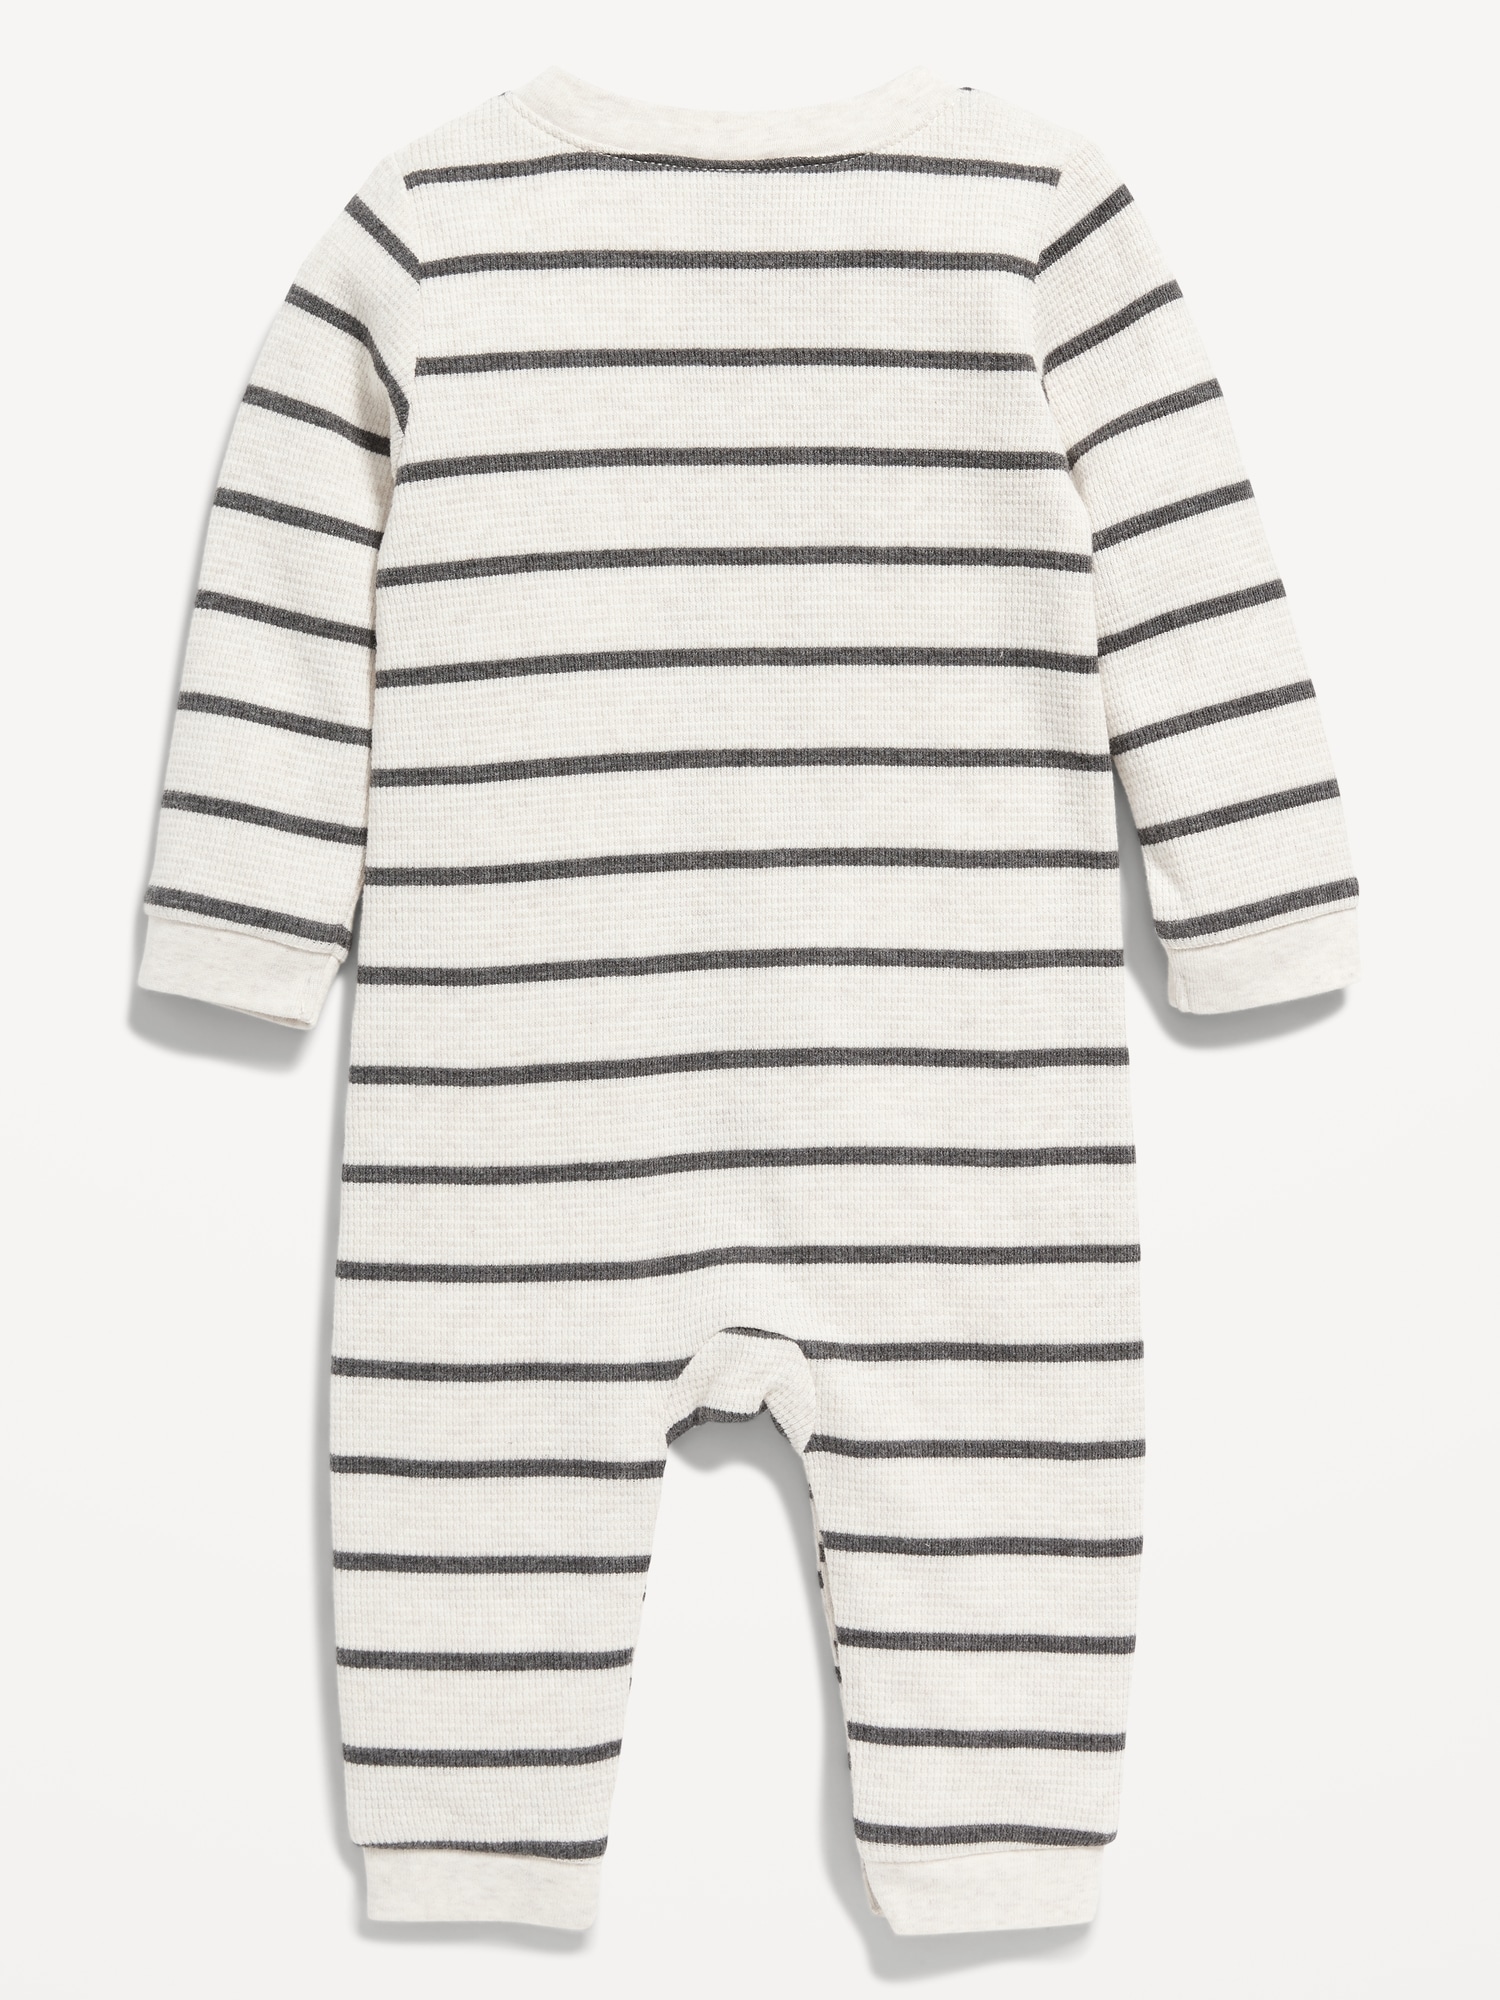 Long-Sleeve Striped Thermal-Knit Henley One-Piece for Baby | Old Navy